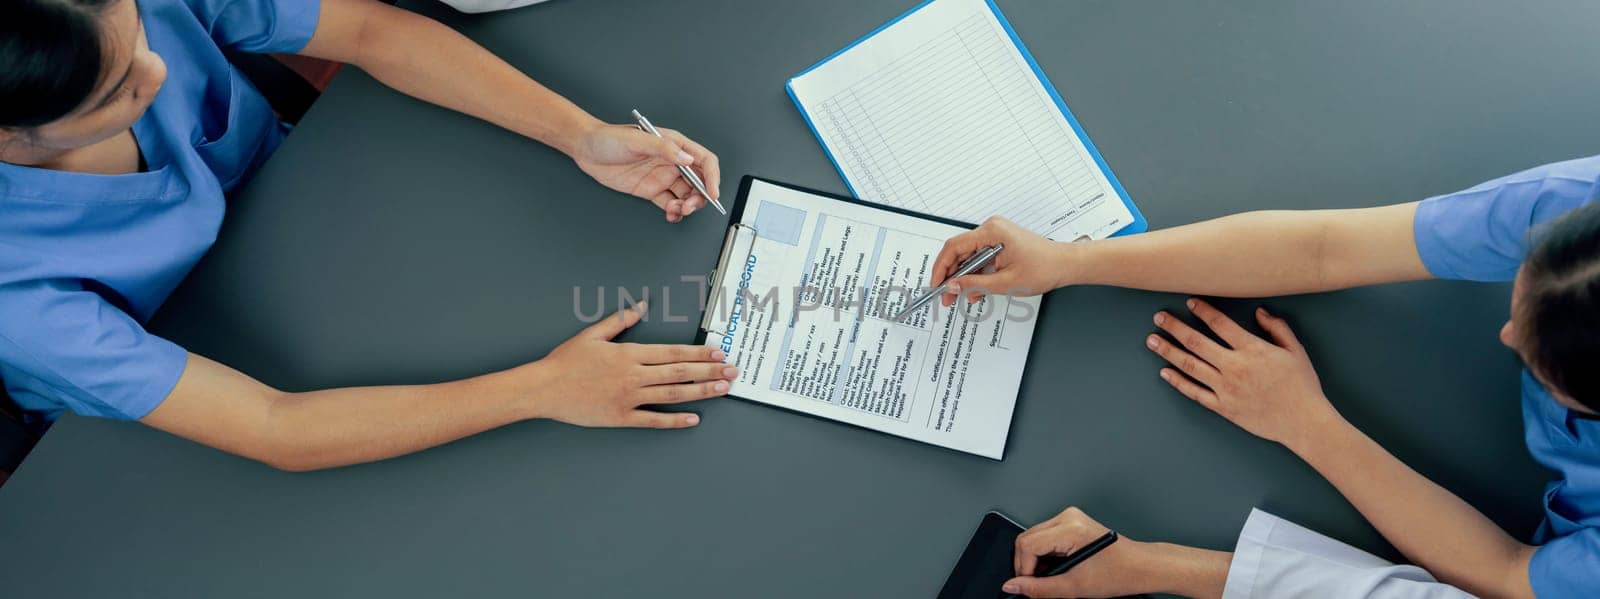 Doctor and nurse in medical meeting discussing strategic medical treatment plan together with report and laptop. Medical school workshop training concept in top view panoramic banner. Neoteric